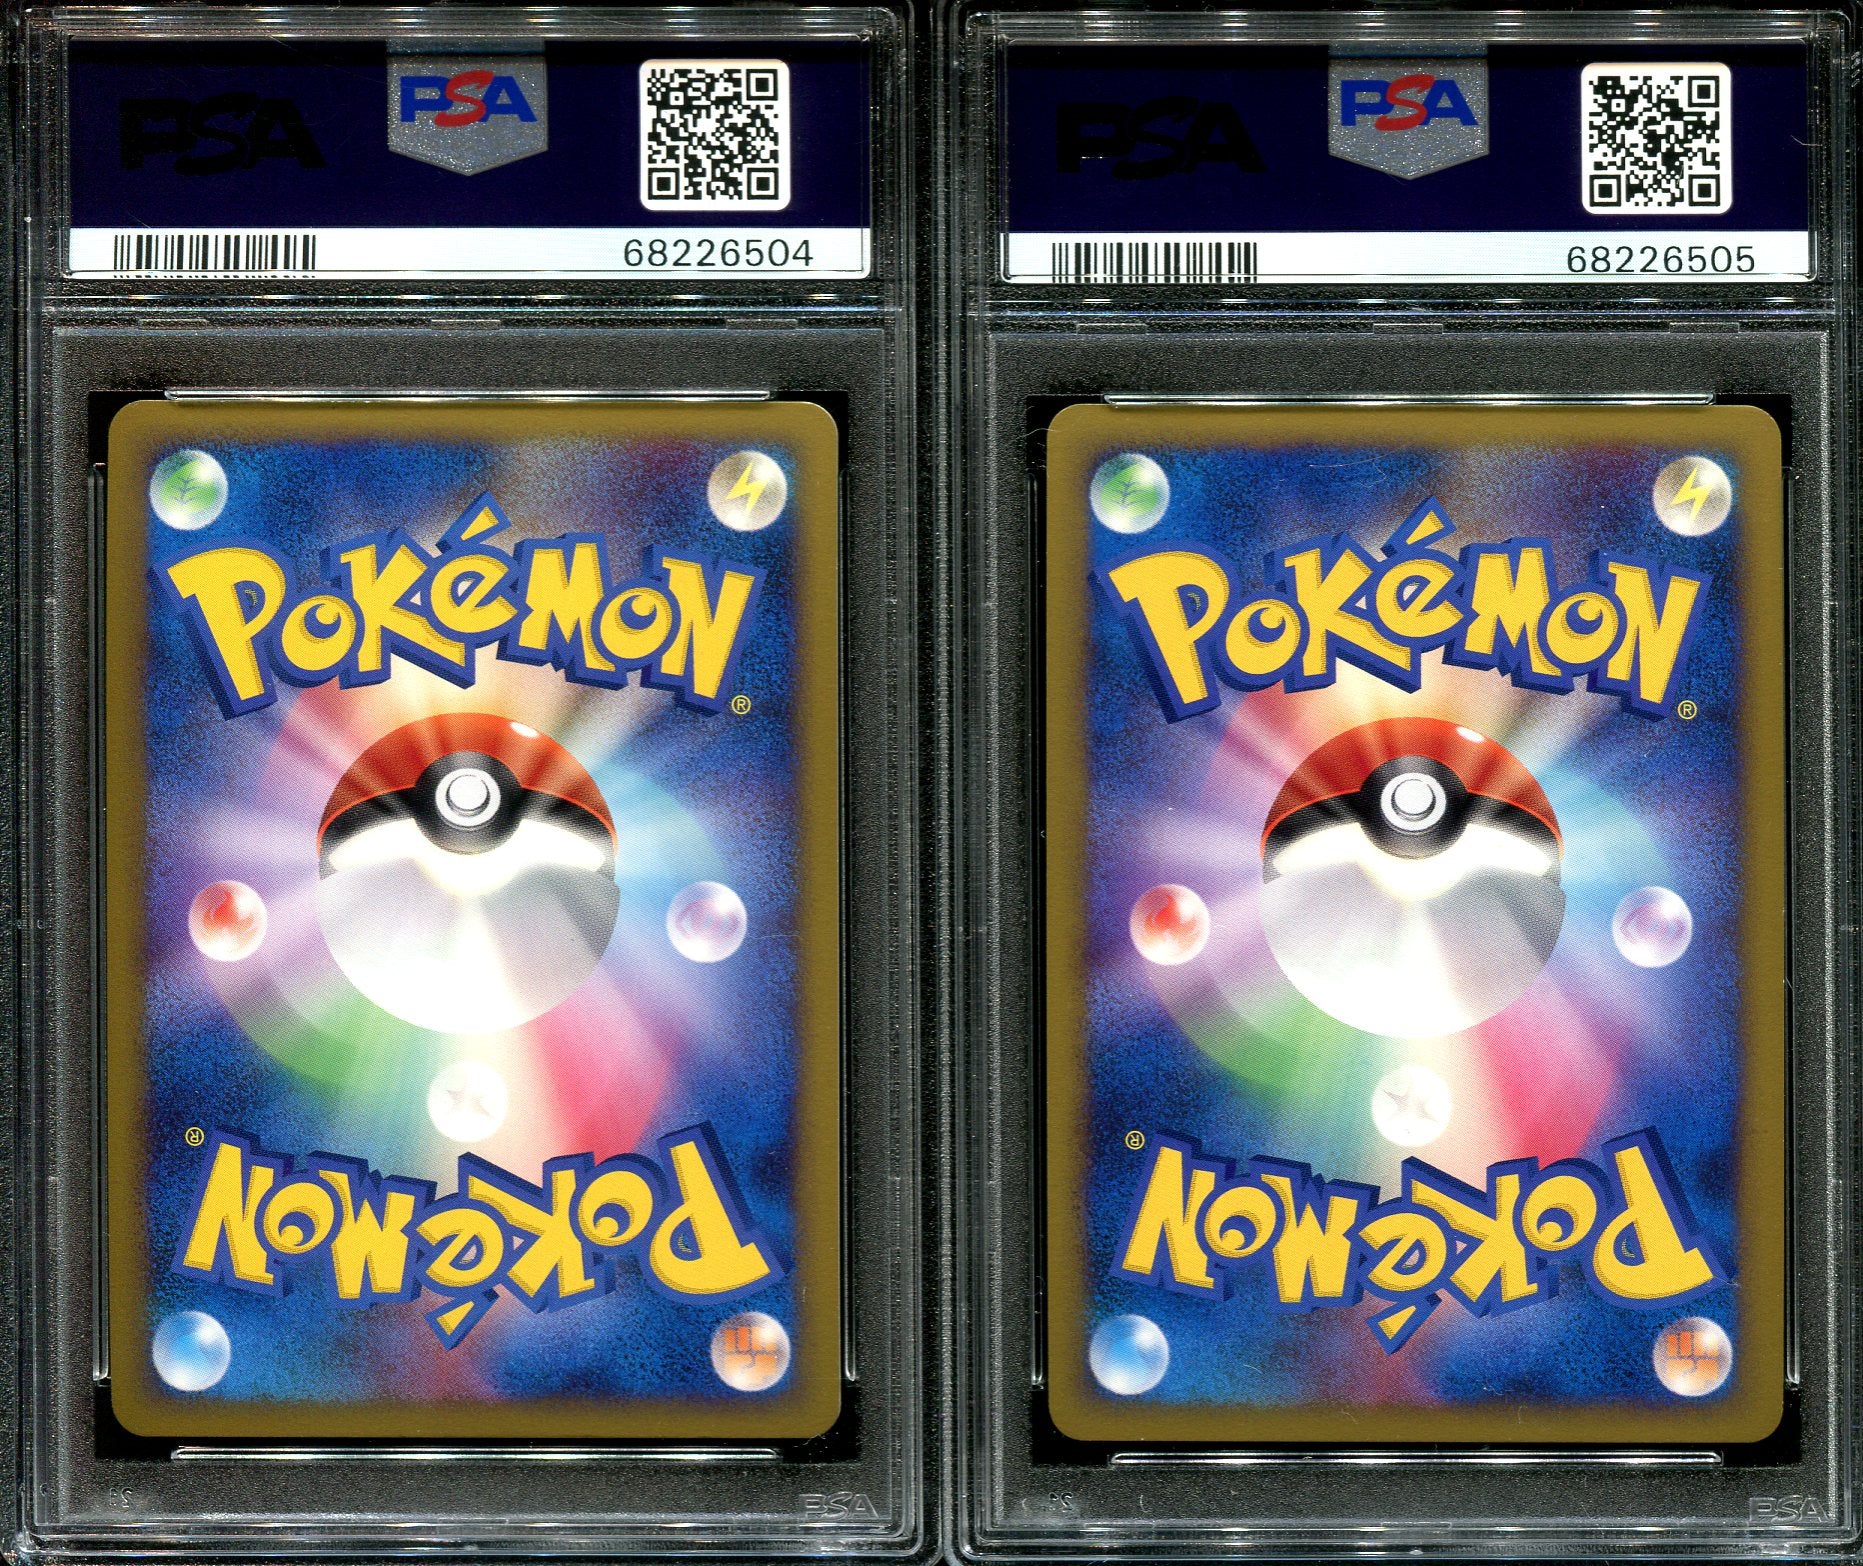 HO-OH LEGEND 015 016/070 PSA 10 POKEMON HEARTGOLD L1 JAPANESE SEQUENTIAL SET OF TWO